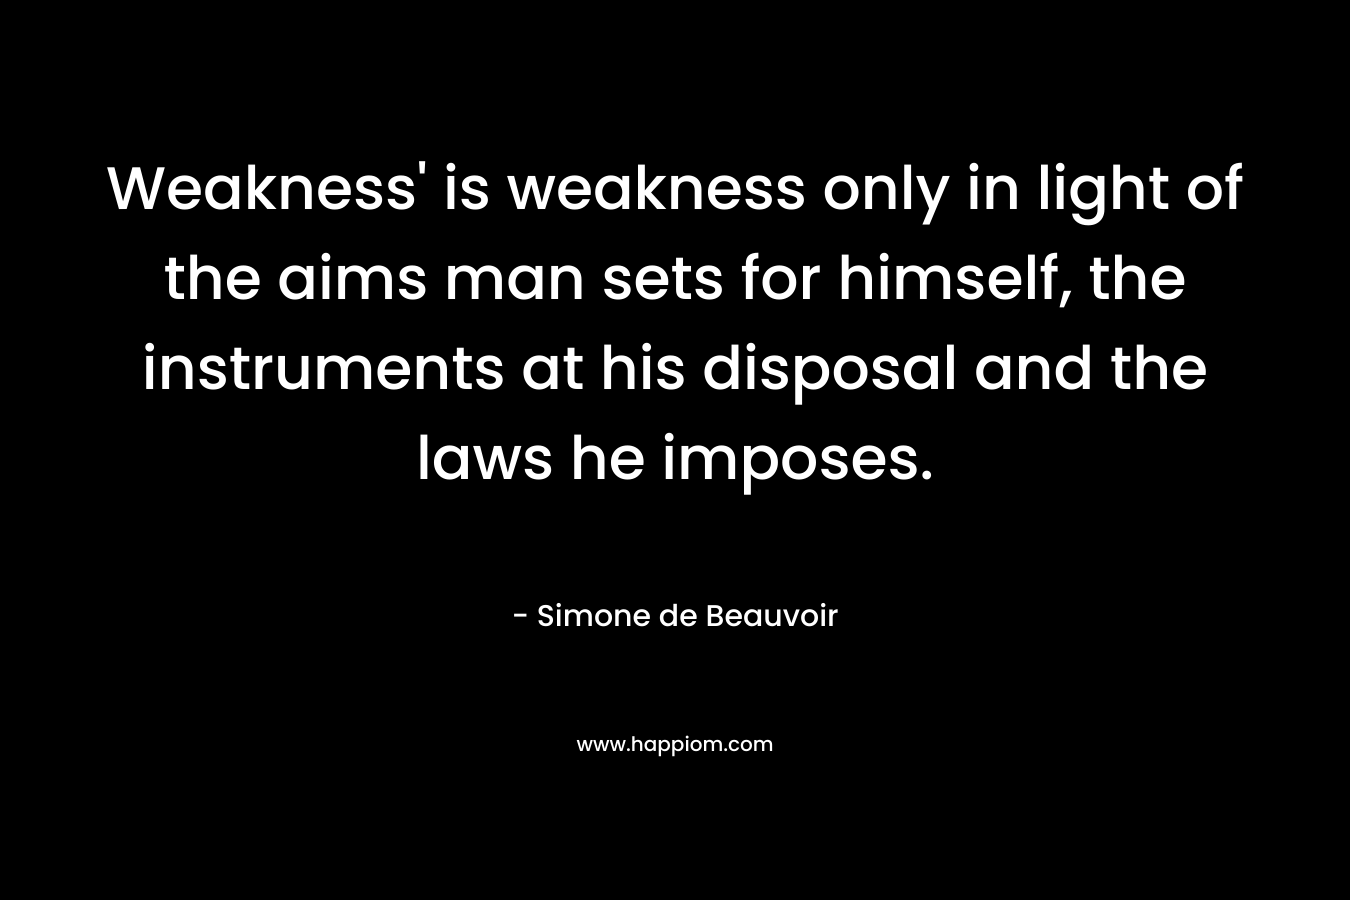 Weakness’ is weakness only in light of the aims man sets for himself, the instruments at his disposal and the laws he imposes. – Simone de Beauvoir